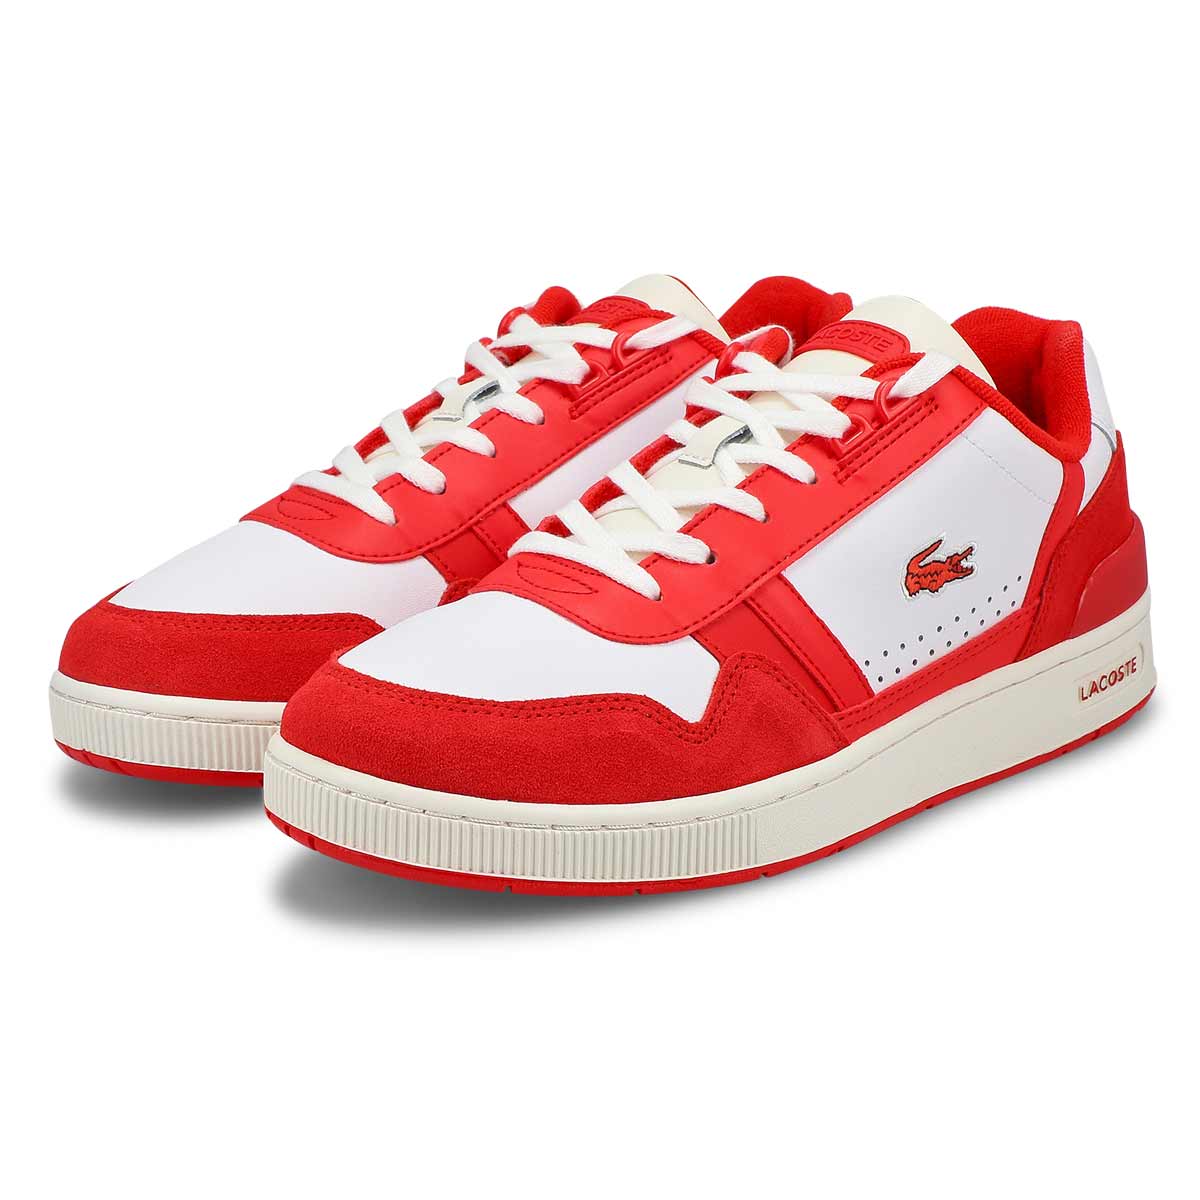 Men's T-Clip Leather Lace Up Fashion Sneaker - White/Red